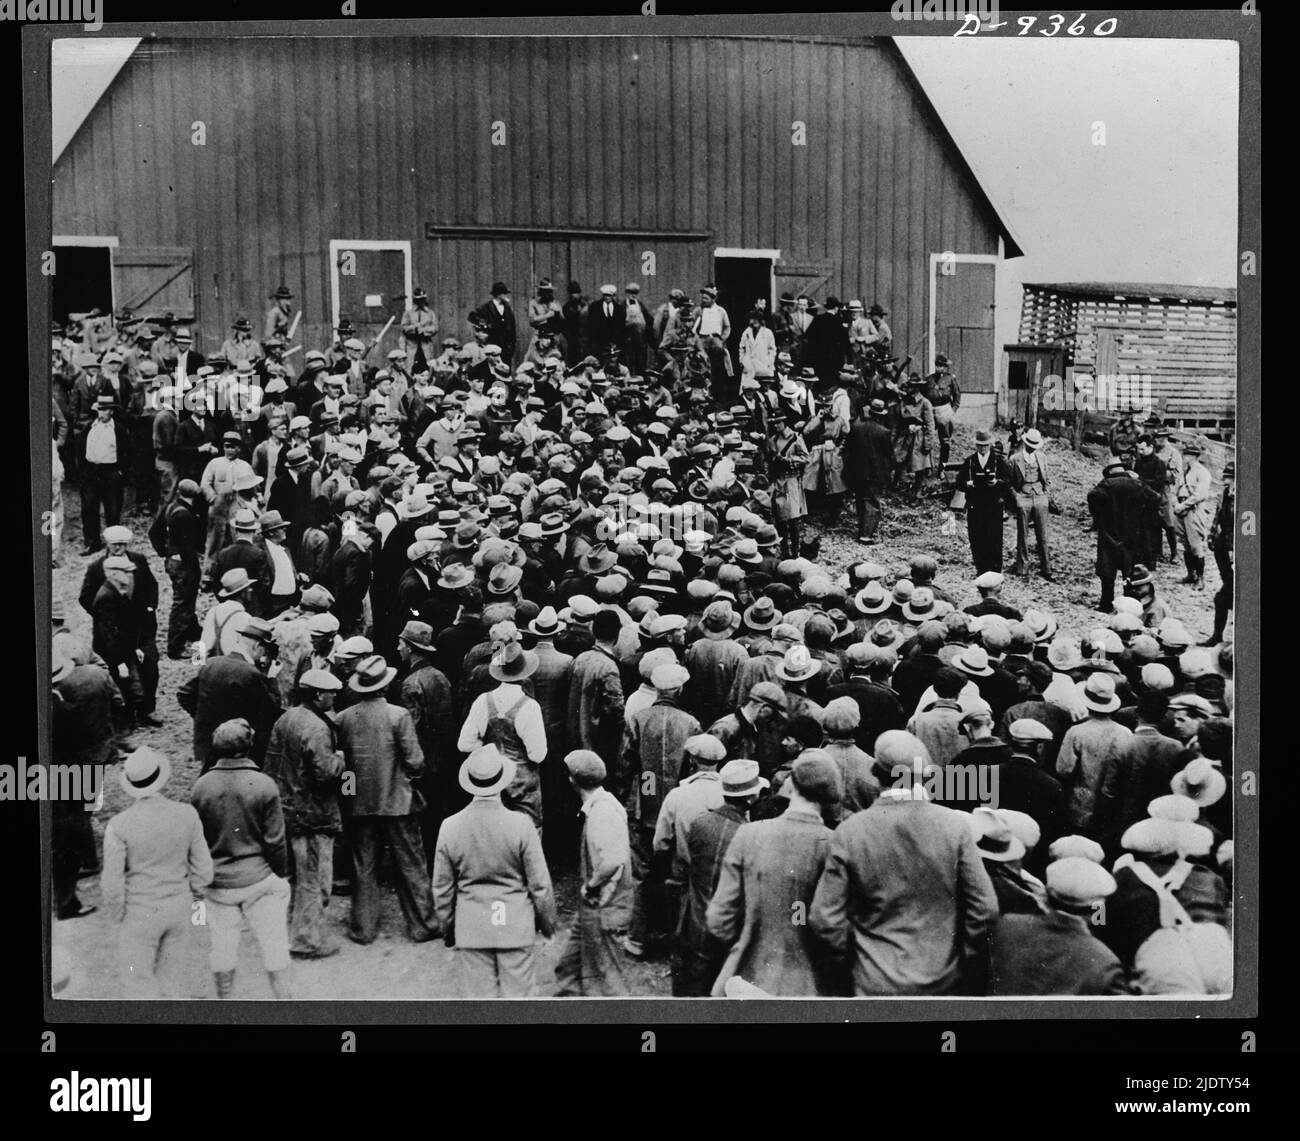 Inflation. Aftermath of inflation--a foreclosure tale in Iowa in the early 1930s when 'the bottom fell out of everything.' Military police were on hand to keep farmers from preventing the auction, Iowa, circa 1931. Stock Photo